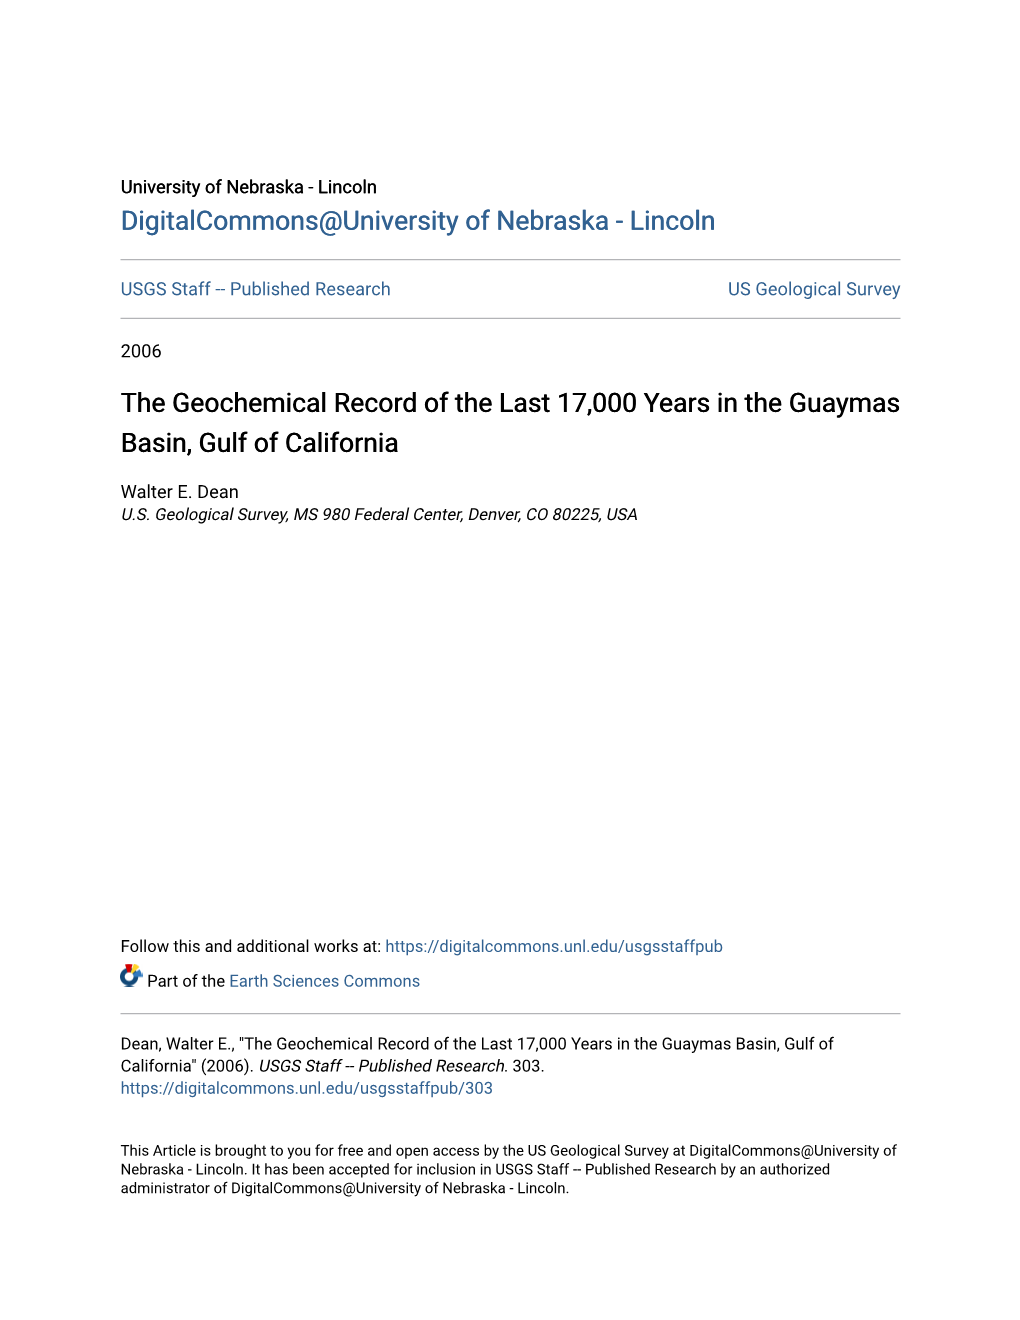 The Geochemical Record of the Last 17,000 Years in the Guaymas Basin, Gulf of California